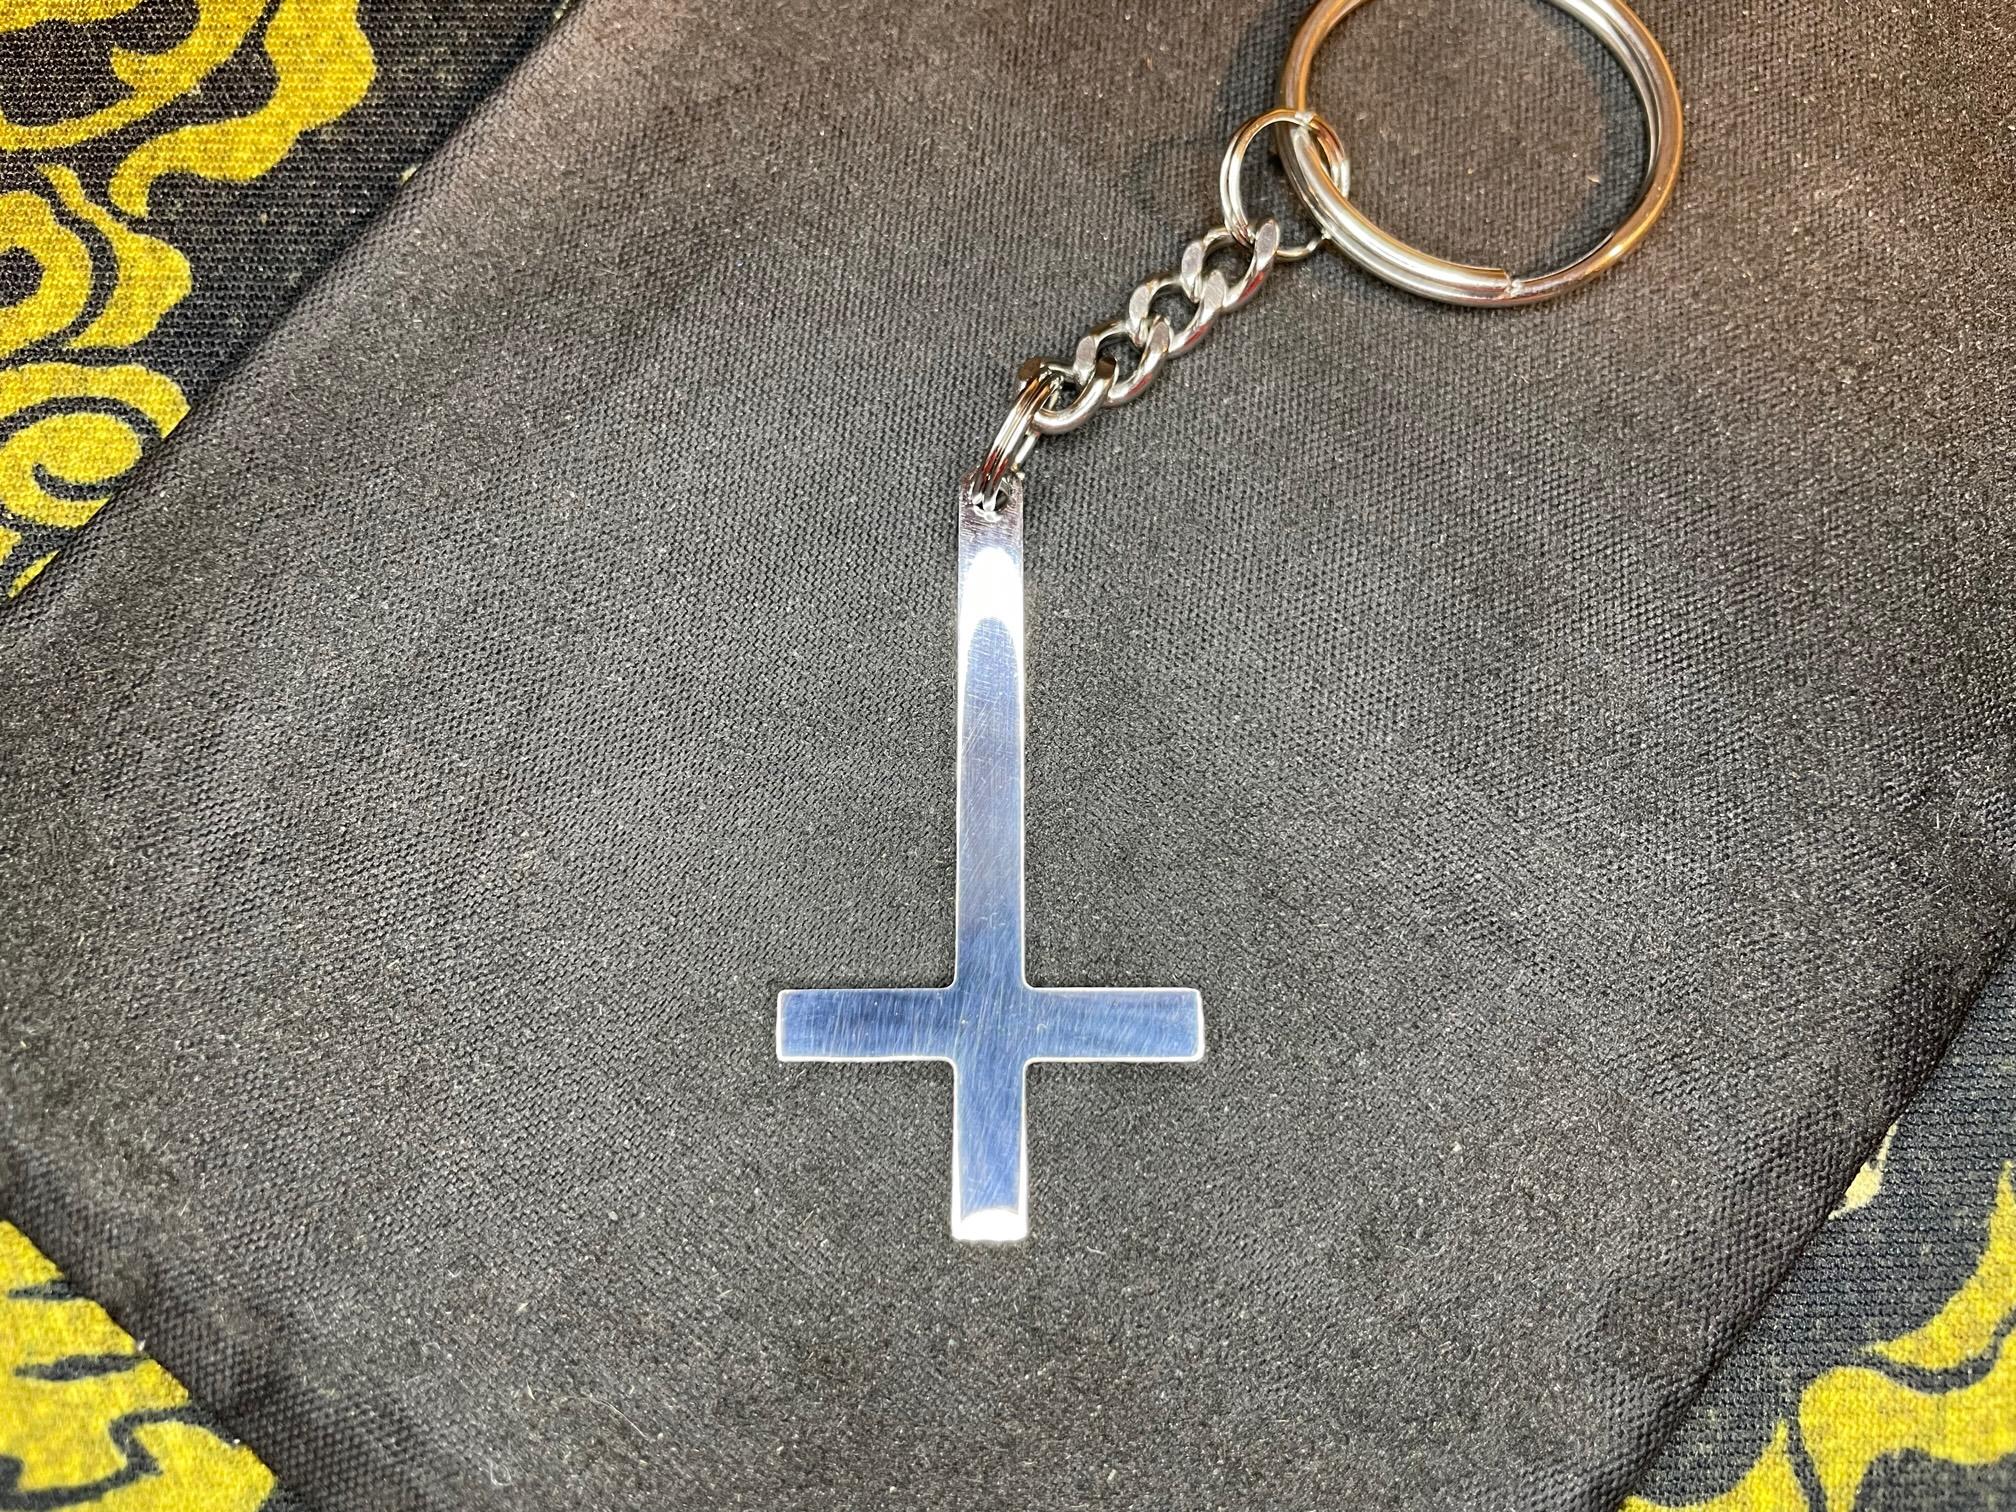 Upside Down Inverted Cross Stainless Steel Pendant Keychain Gothic Minimalist Retro Satanic Pagan Wiccan Druid Occult Darkness Jewelry Silver Color